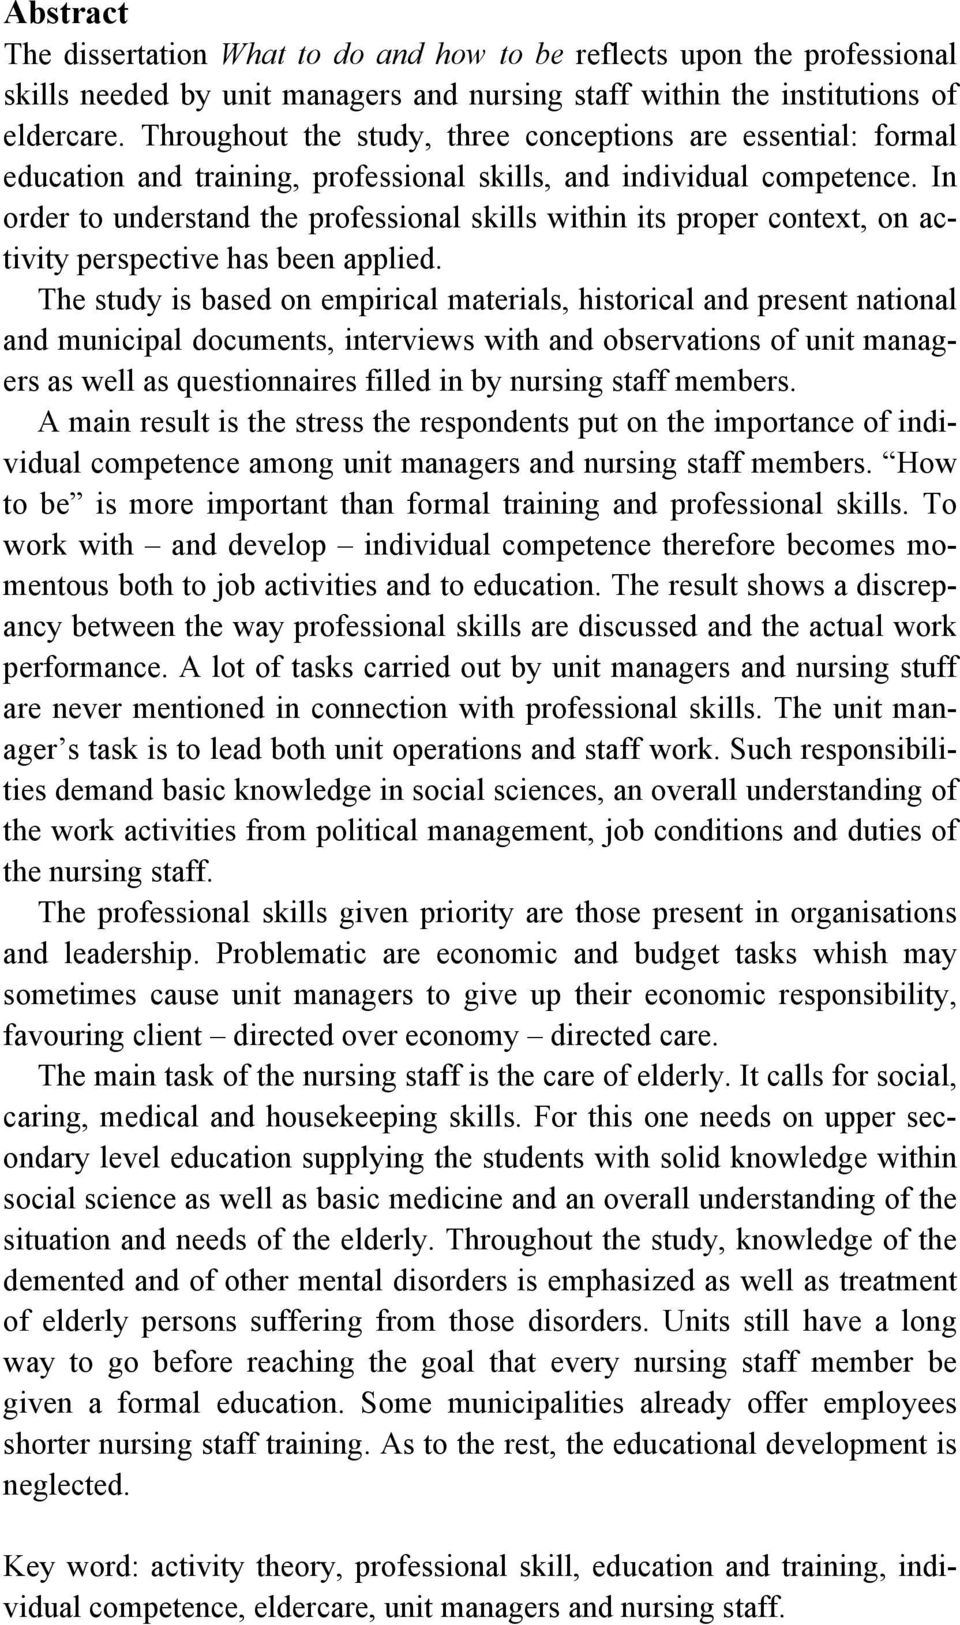 In order to understand the professional skills within its proper context, on activity perspective has been applied.